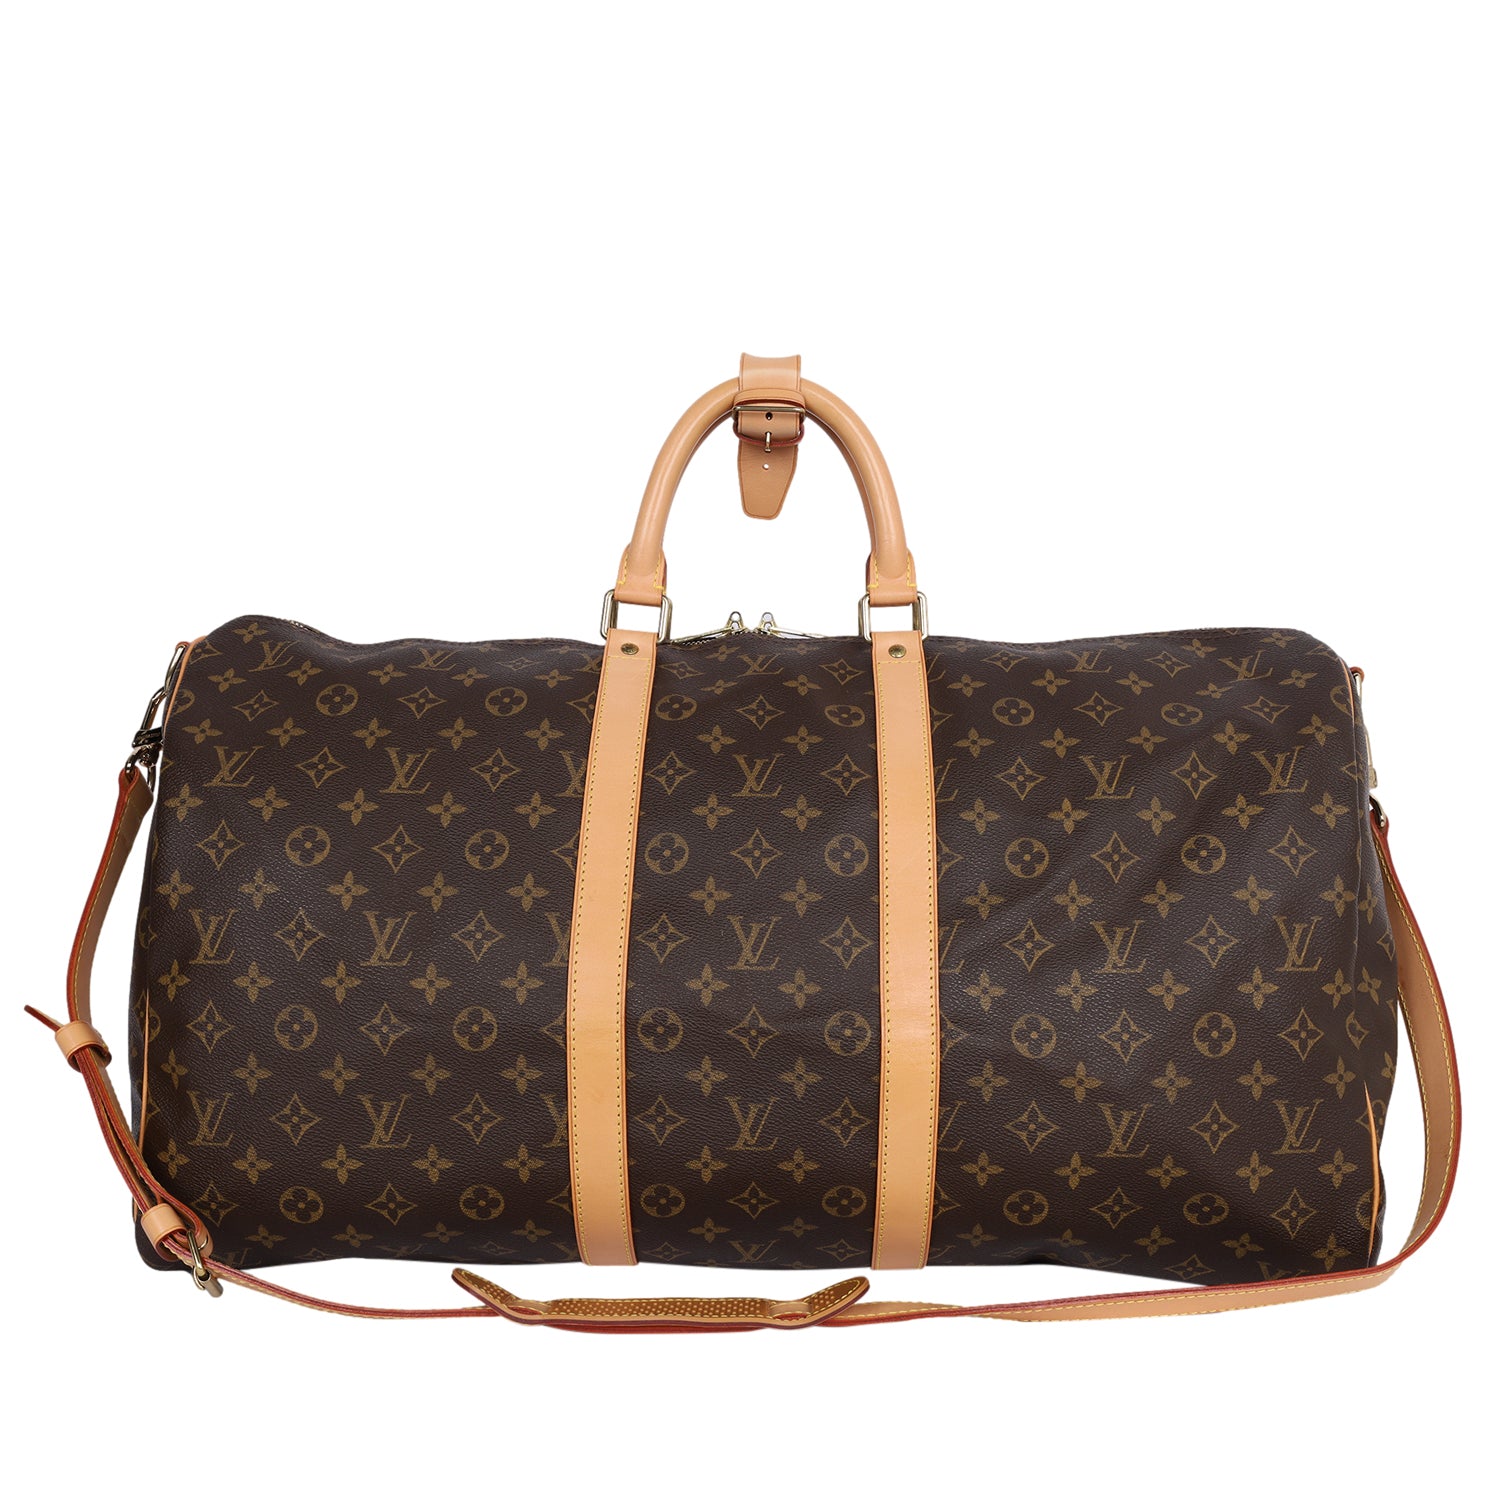 Monogram Bandouliere Keepall 55 Duffle (Authentic Pre-Owned) – The Lady Bag